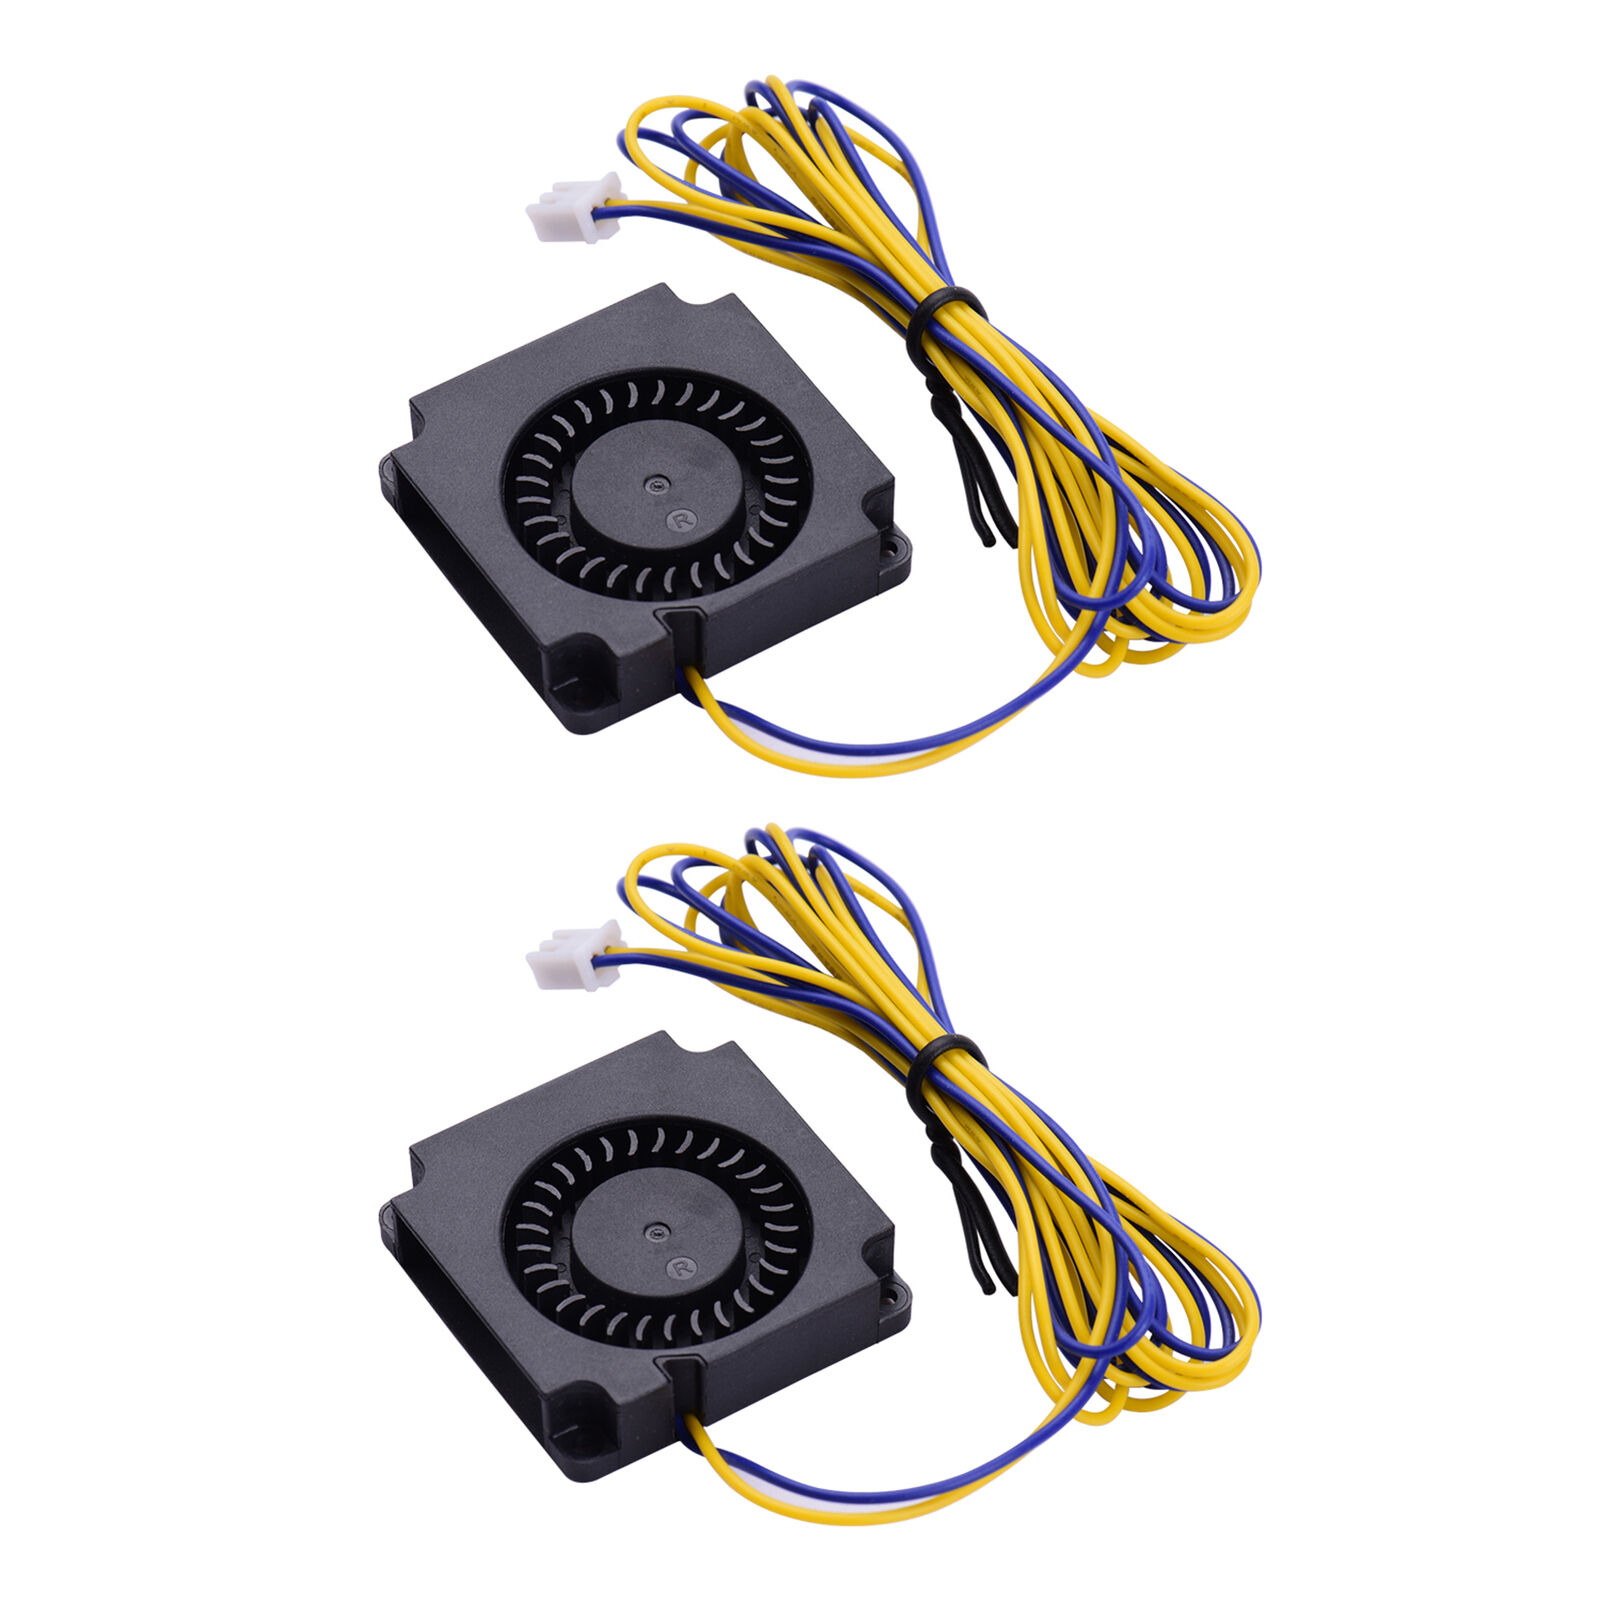 2pcs Blower Fan Brushless Cooling Fan 40*40*10mm  24V Compatible with D1K8